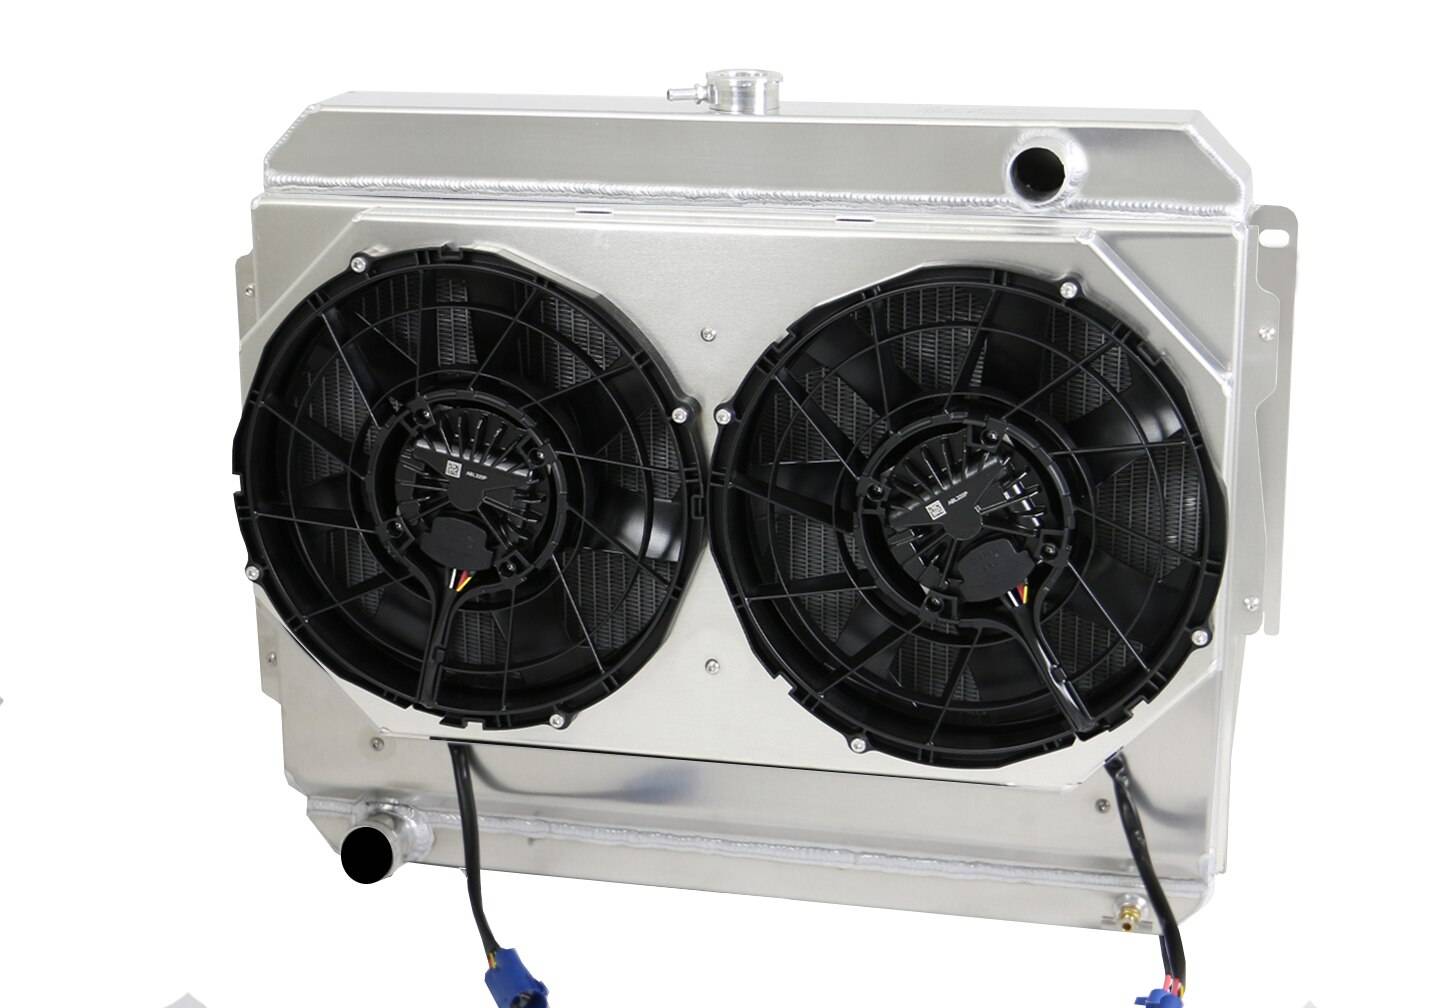 Wizard Cooling Inc - Wizard Cooling - 1966-1969 26" (B/B) Mopar Applications Aluminum Radiator (w/ BRUSHLESS FAN PACKAGE) - 1640-212BLACPC